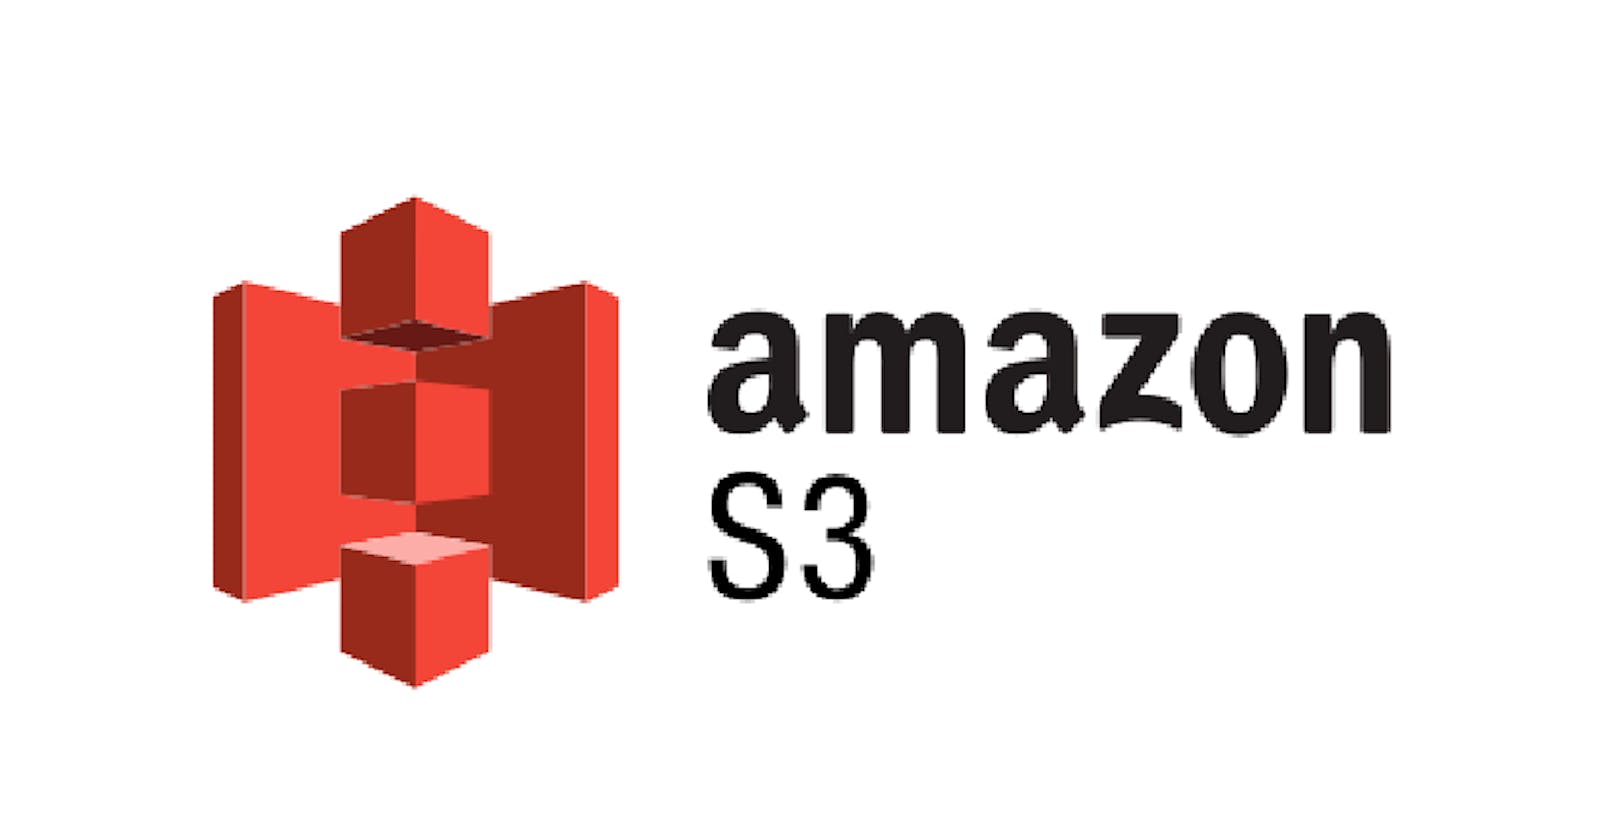 Spring boot: Scale file storage with Amazon S3